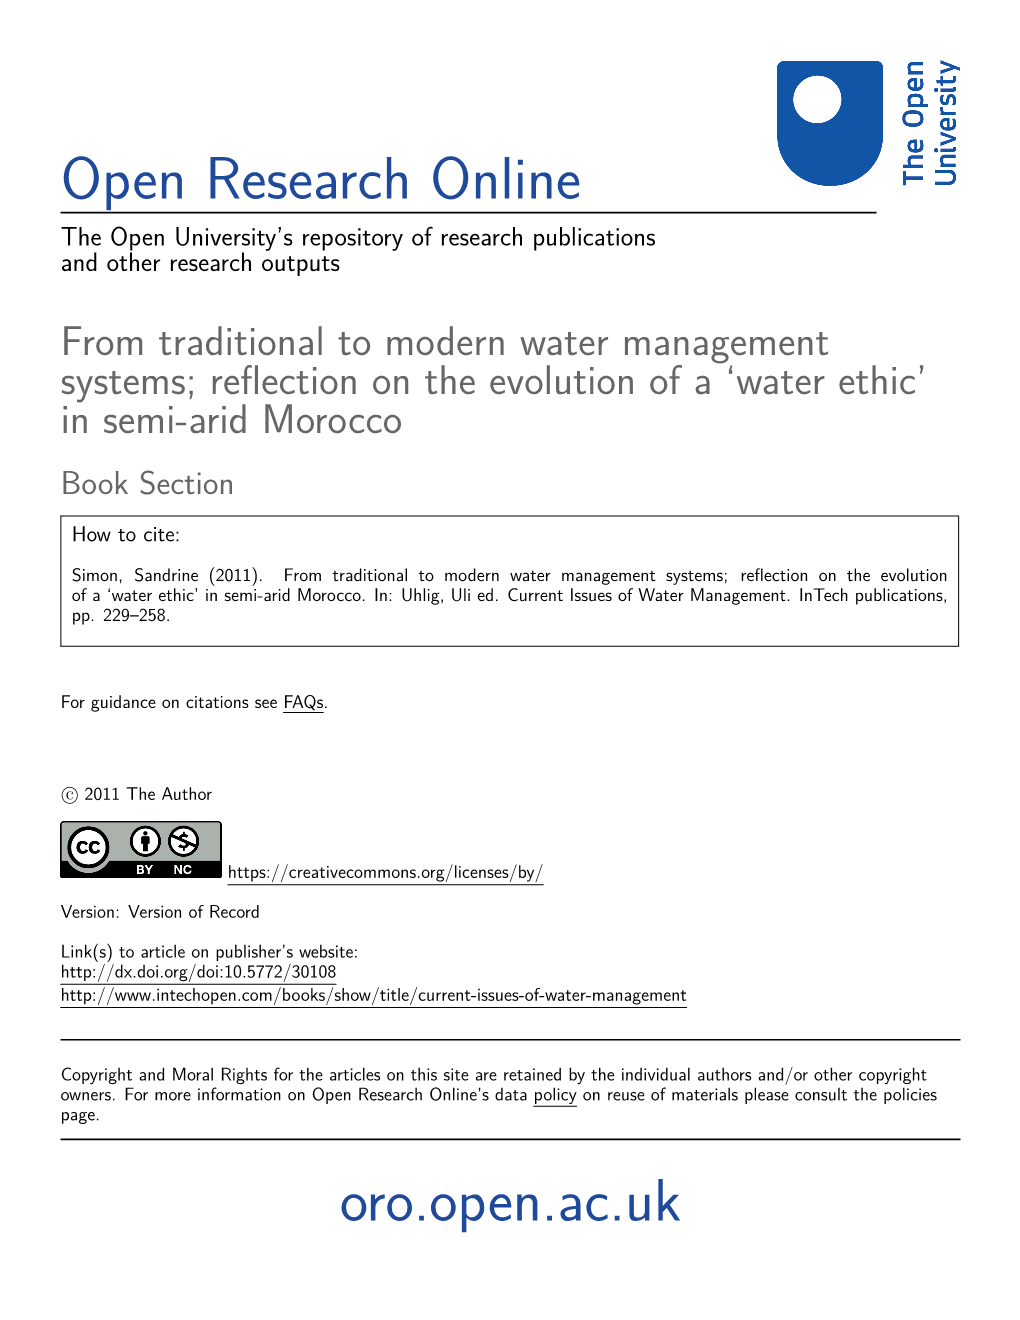 From Traditional to Modern Water Management Systems; Reflection on the Evolution of a ‘Water Ethic’ in Semi-Arid Morocco